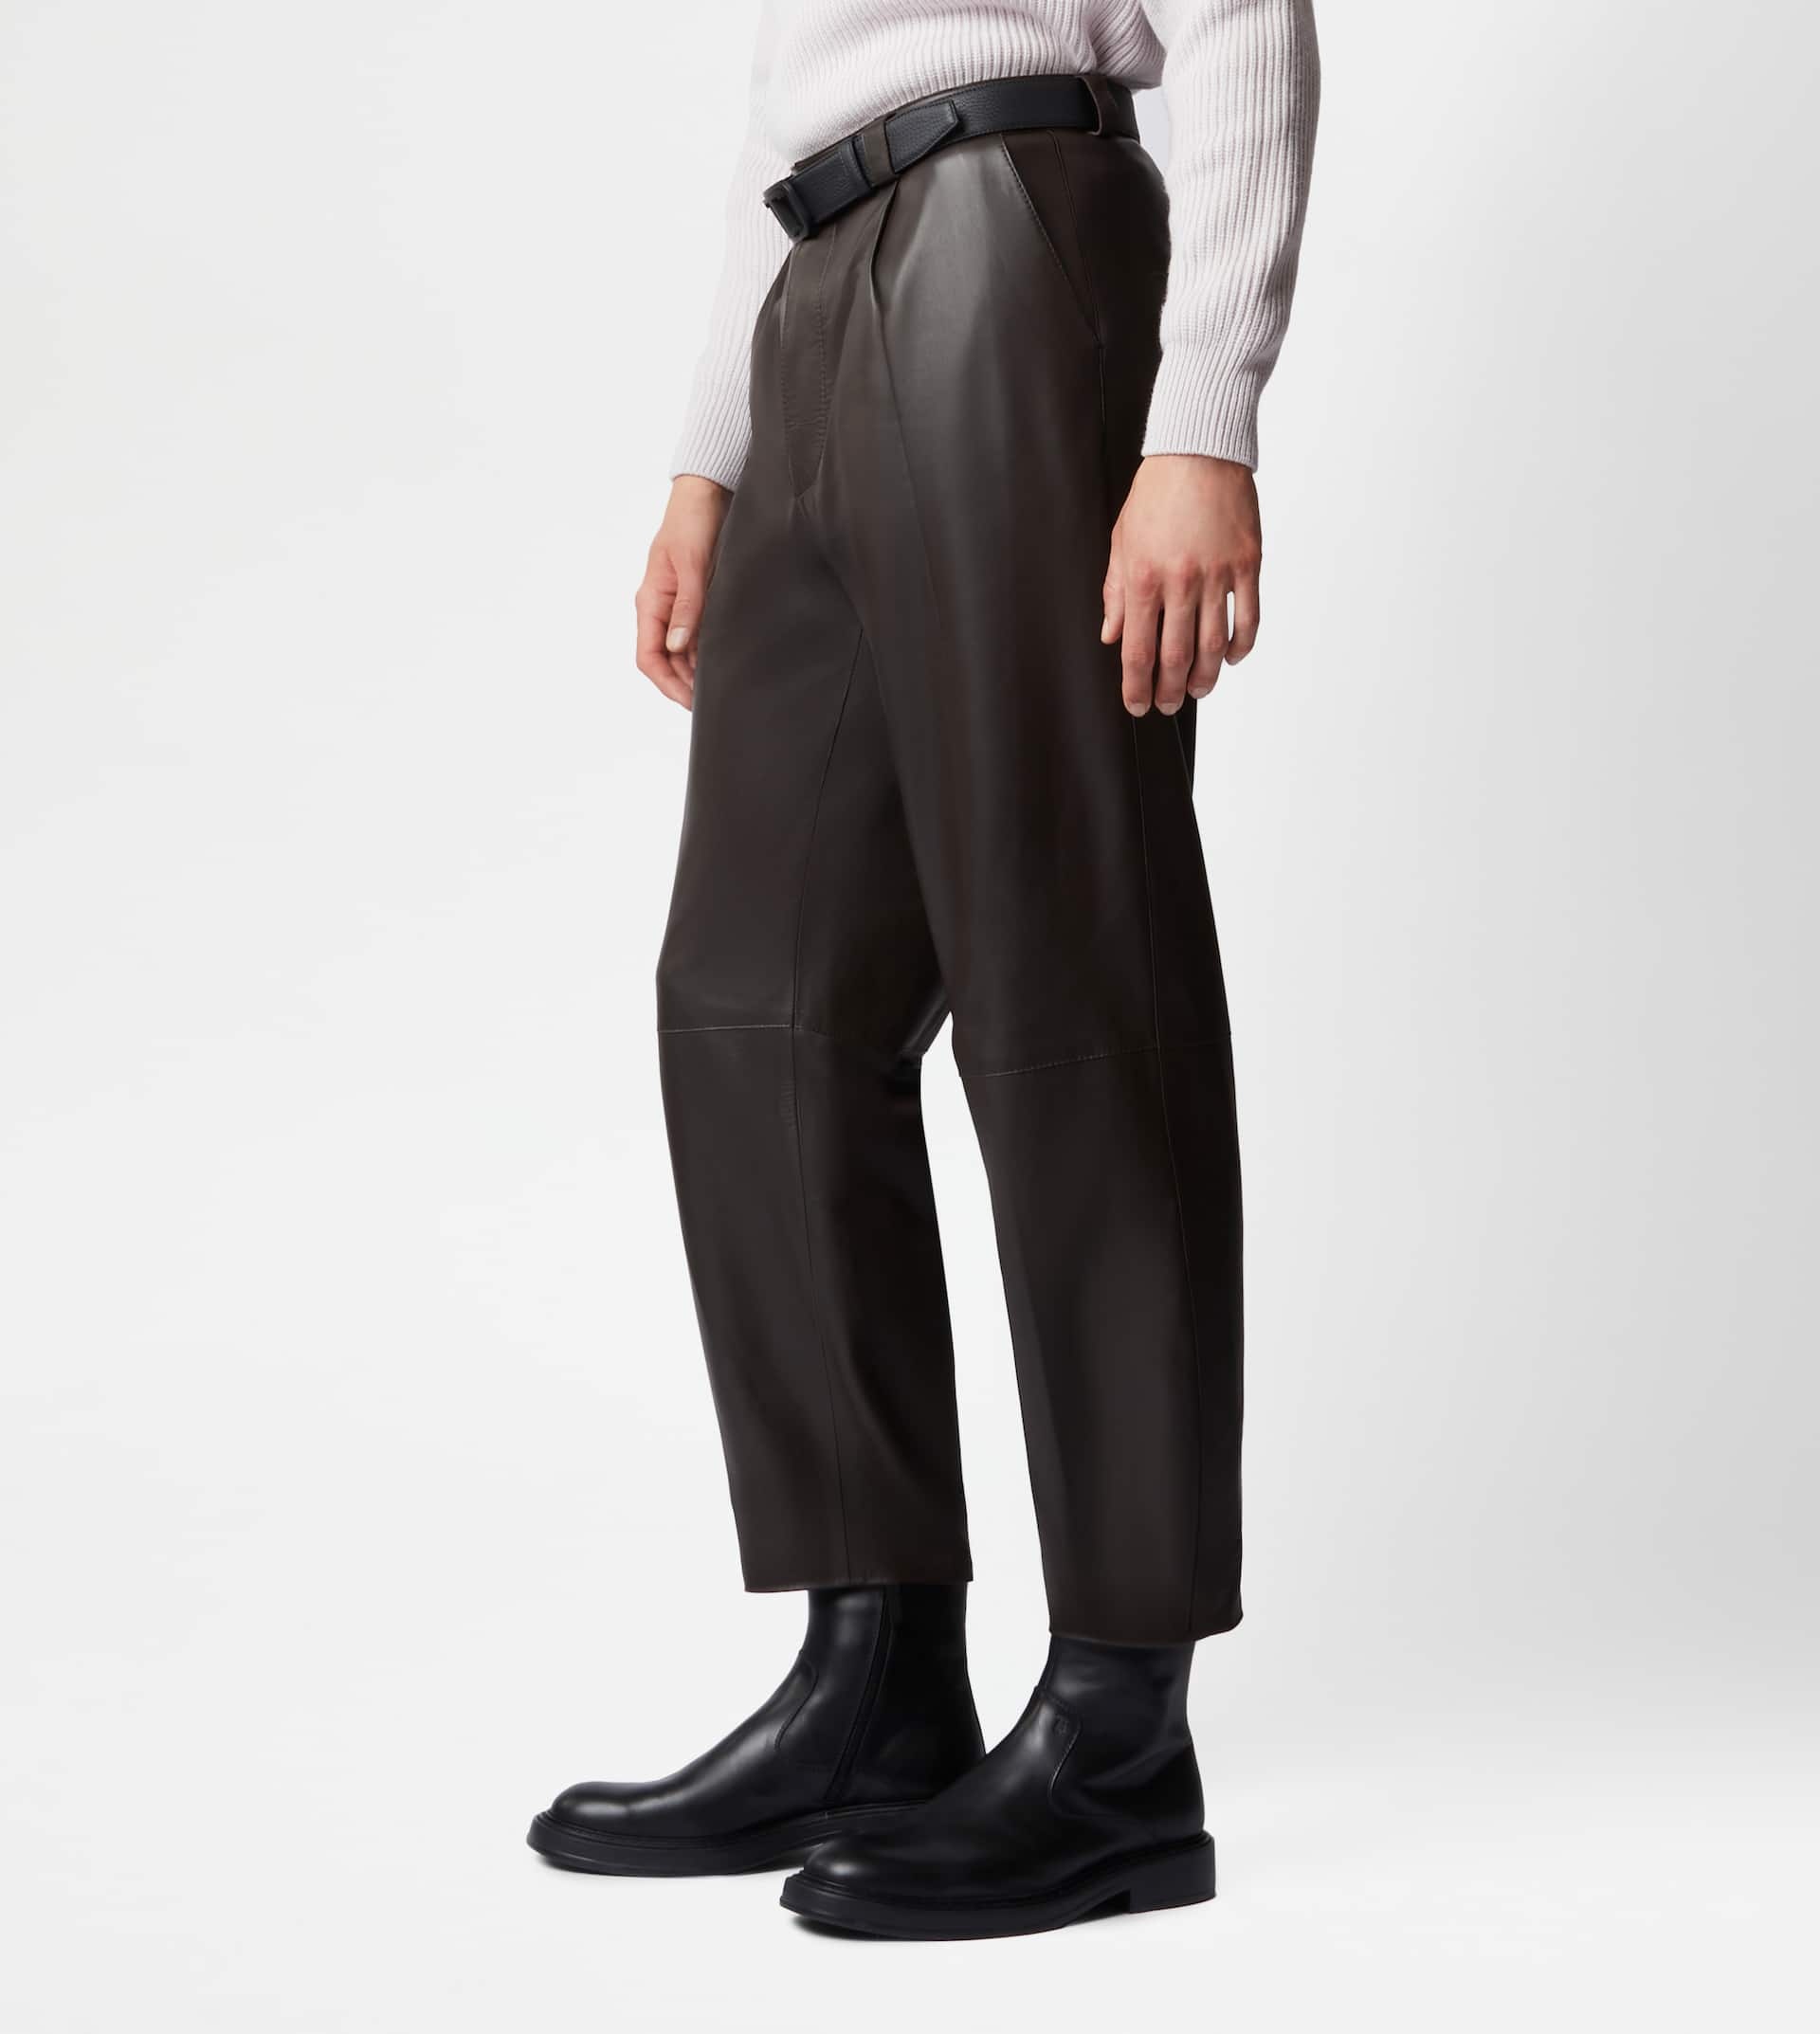 PANTS IN NAPPA LEATHER - BROWN - 2